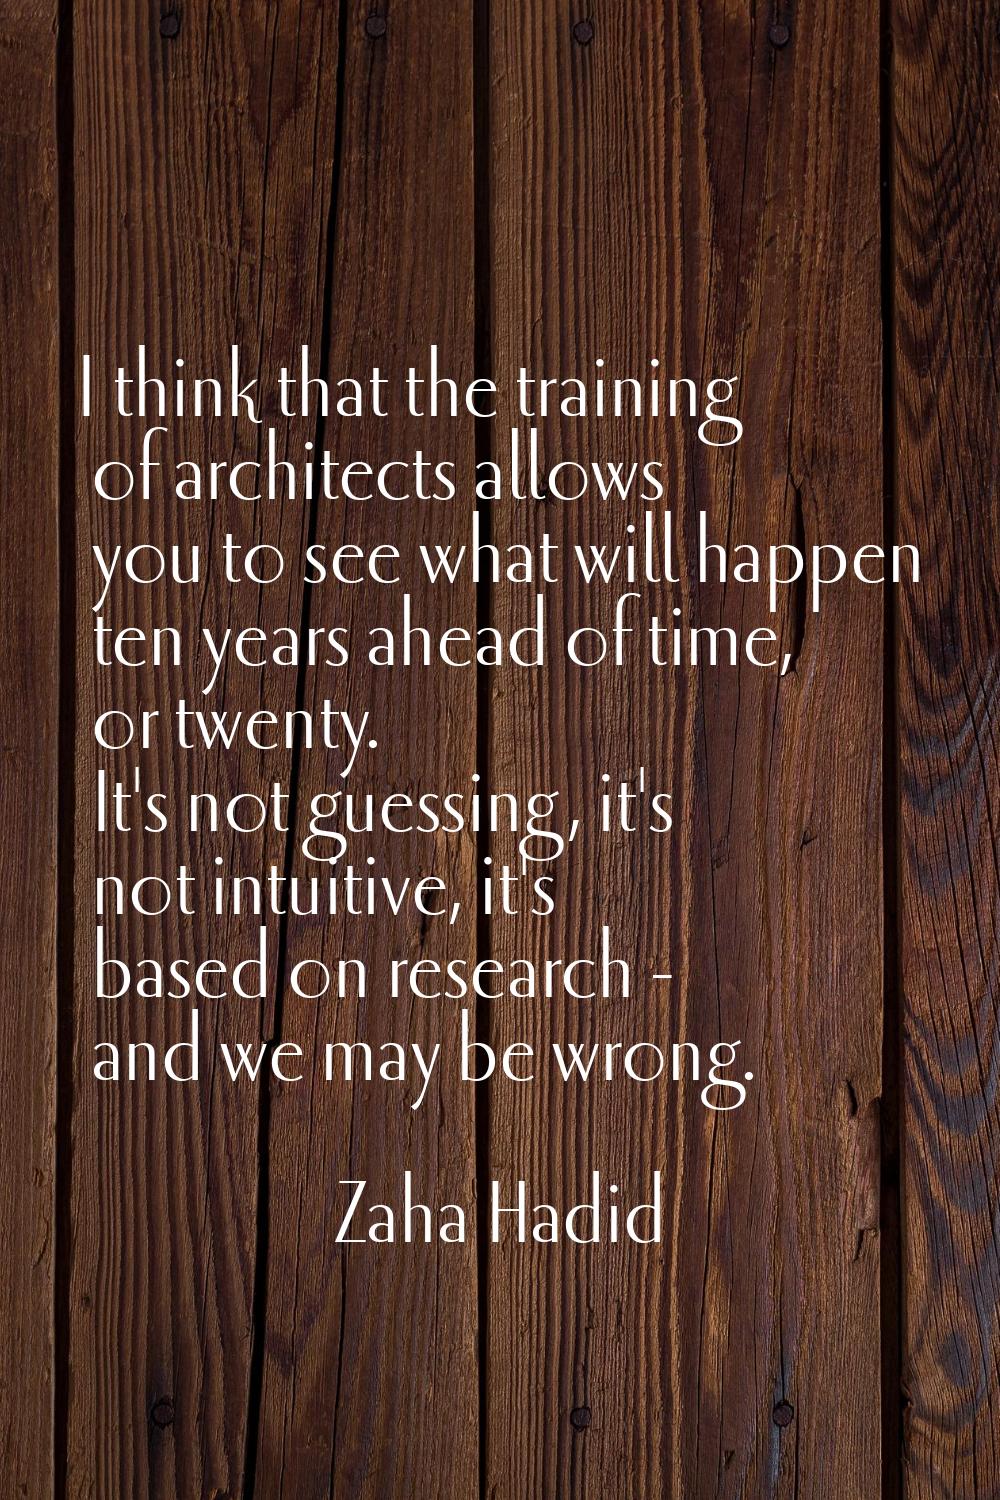 I think that the training of architects allows you to see what will happen ten years ahead of time,